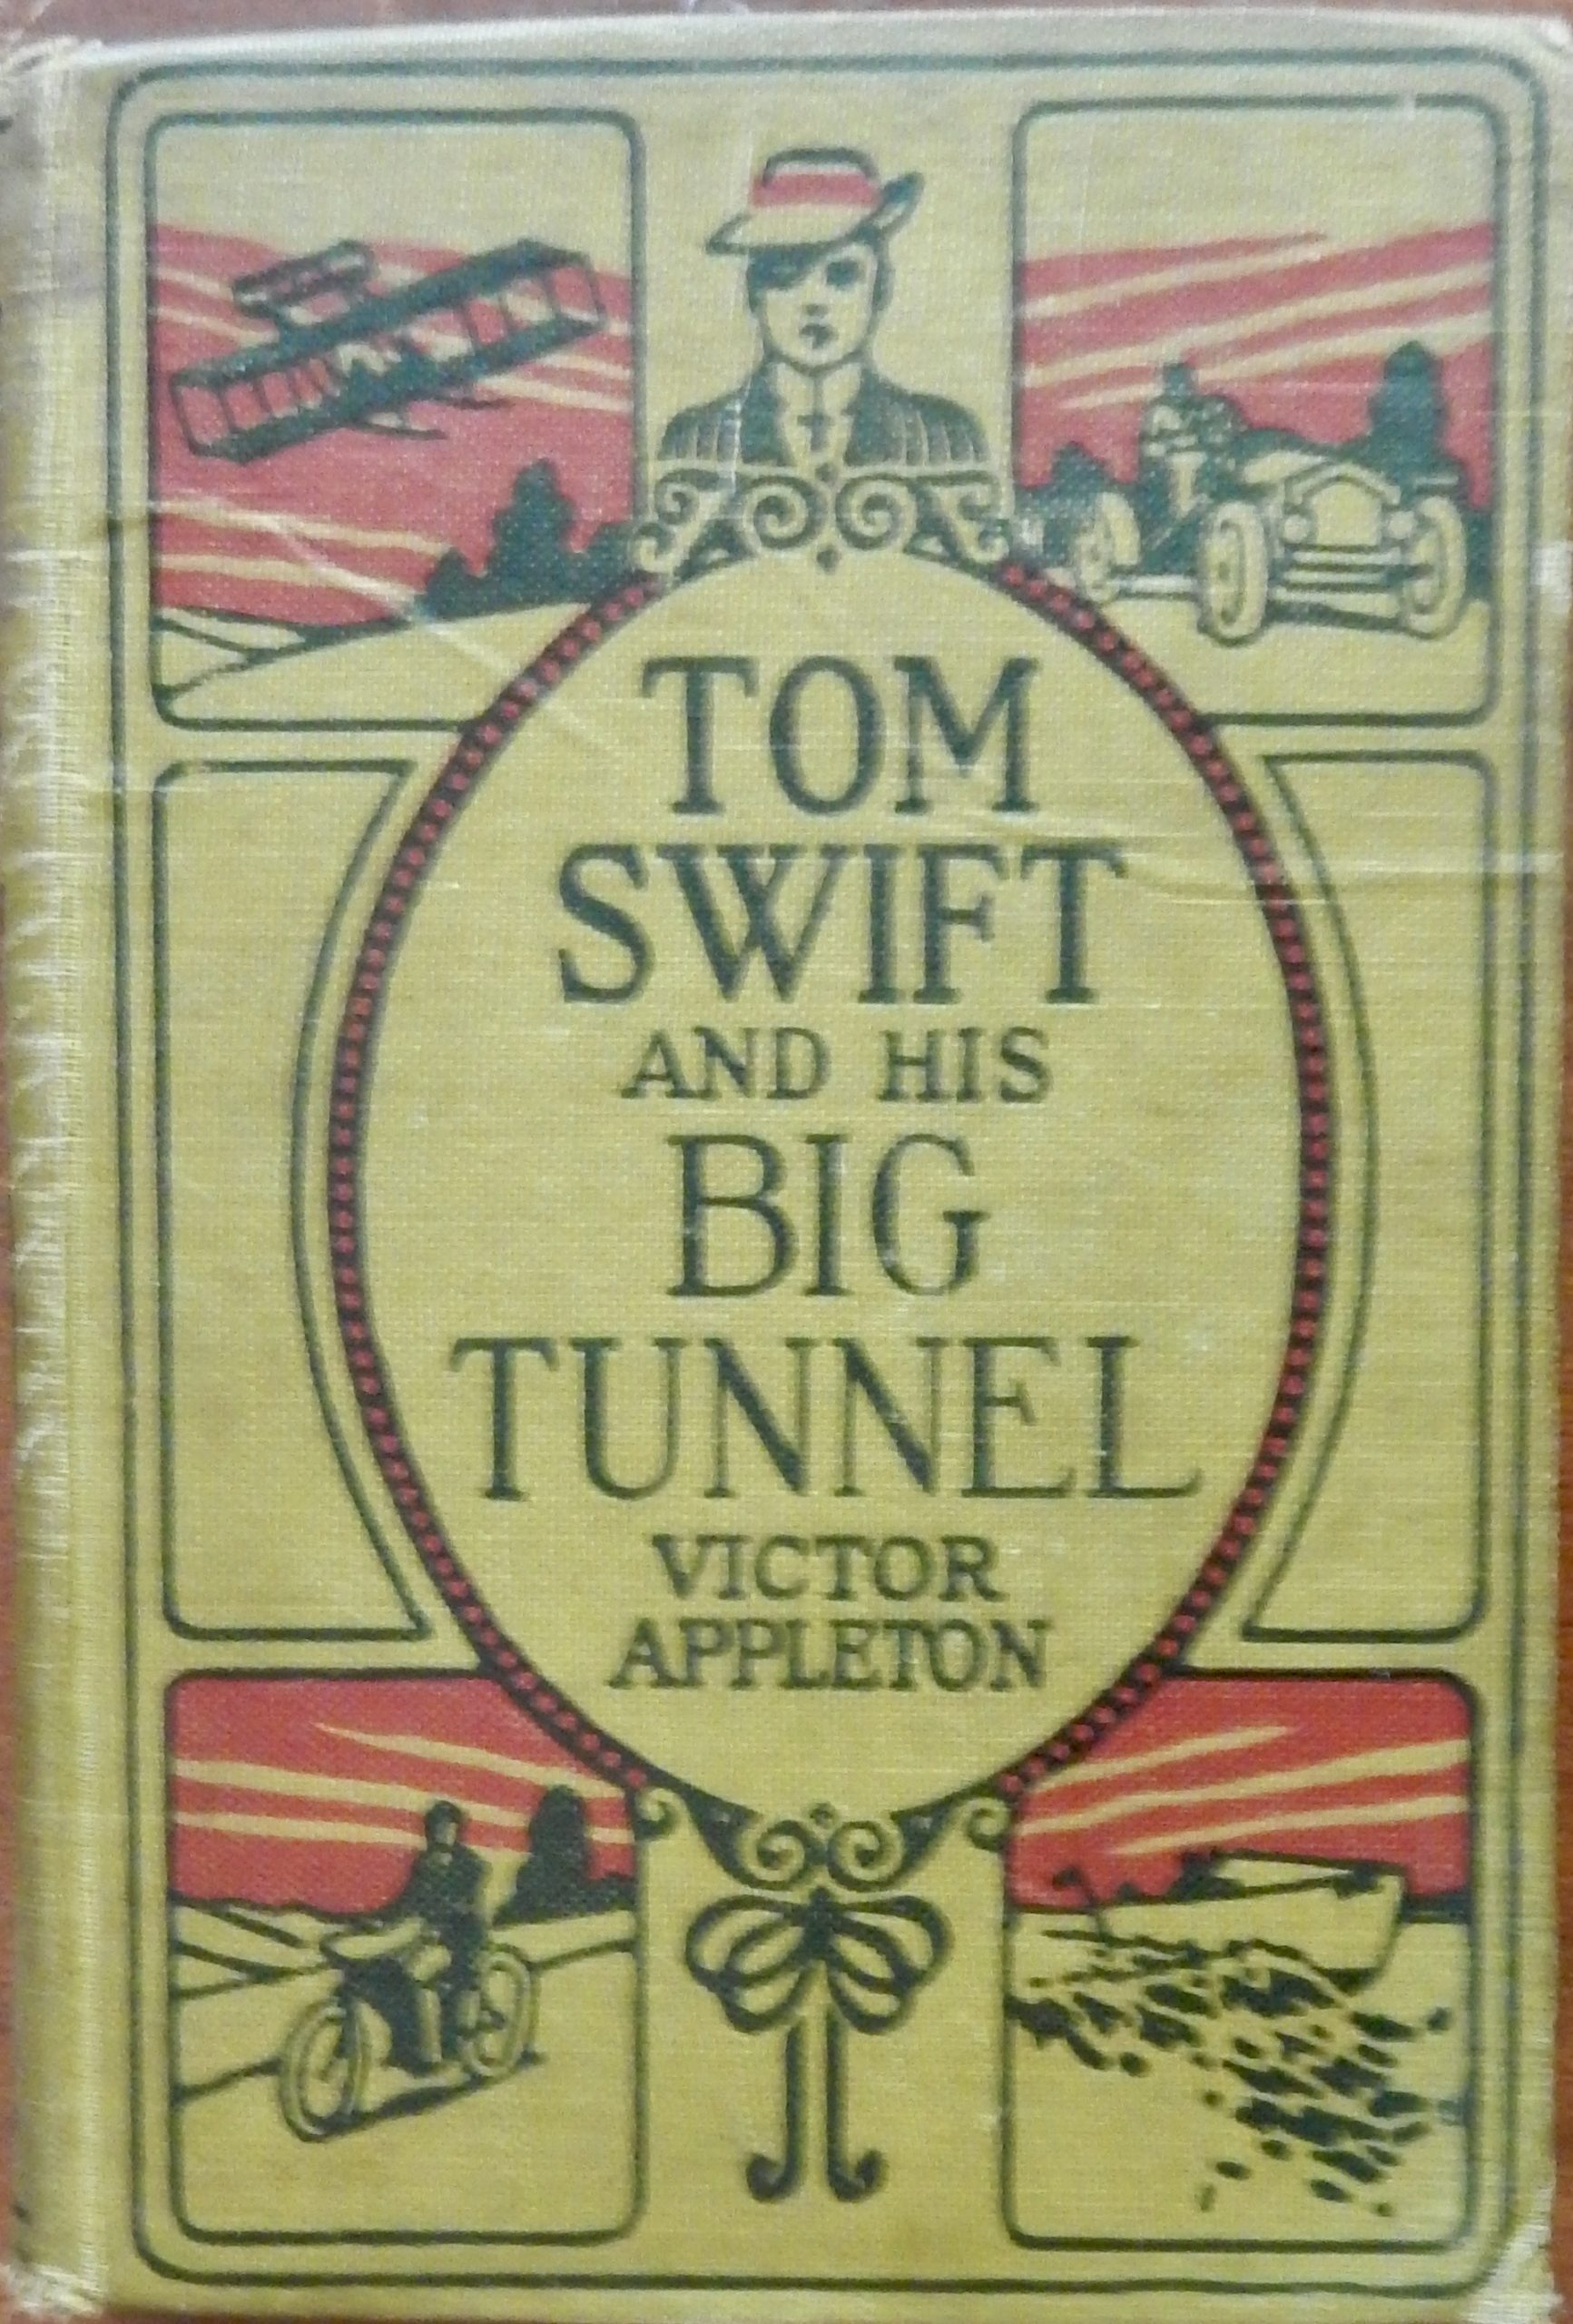 Tom Swift and His Big Tunnel book image